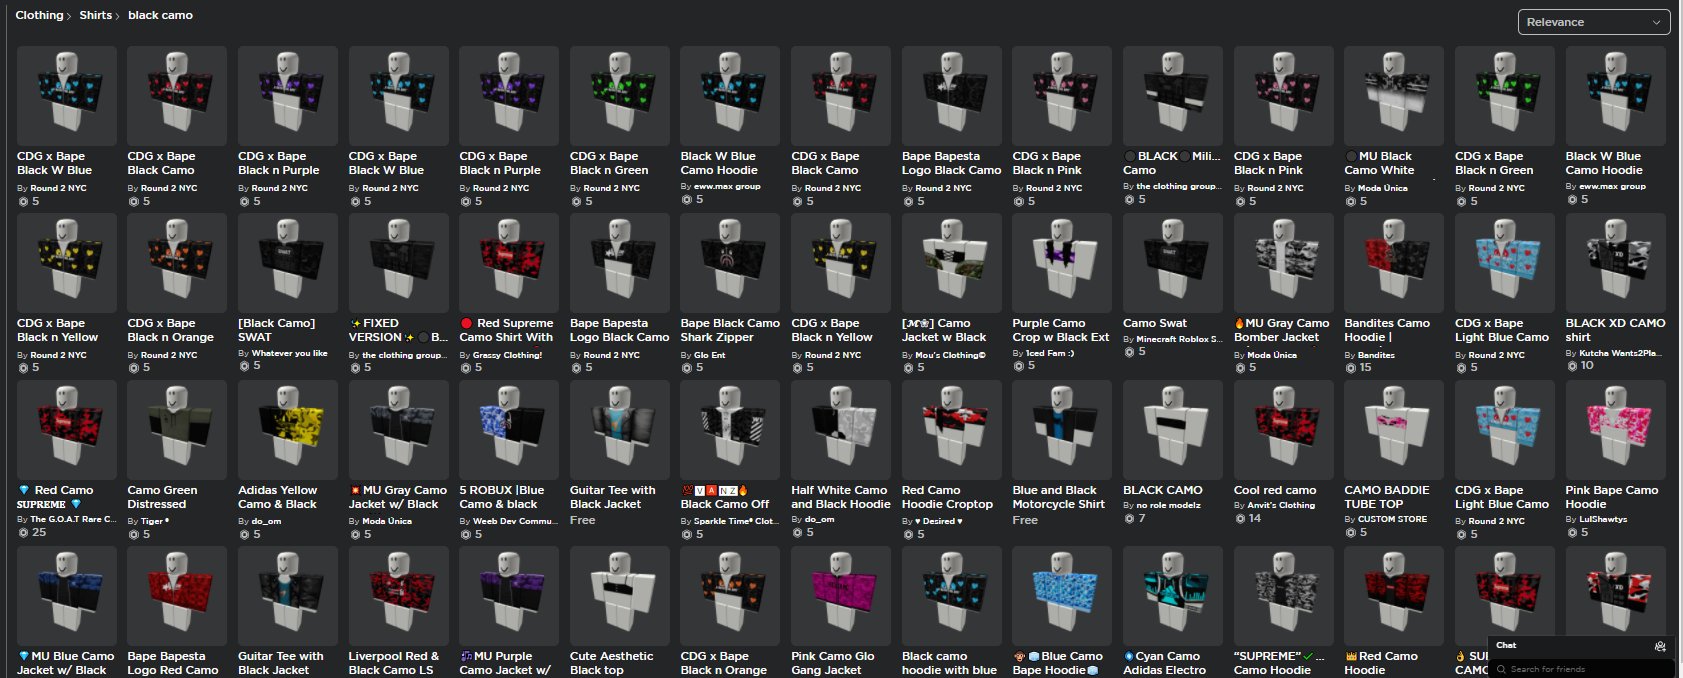 At0zdx On Twitter Roblox When You Search Black Camo - camo hoodie back roblox